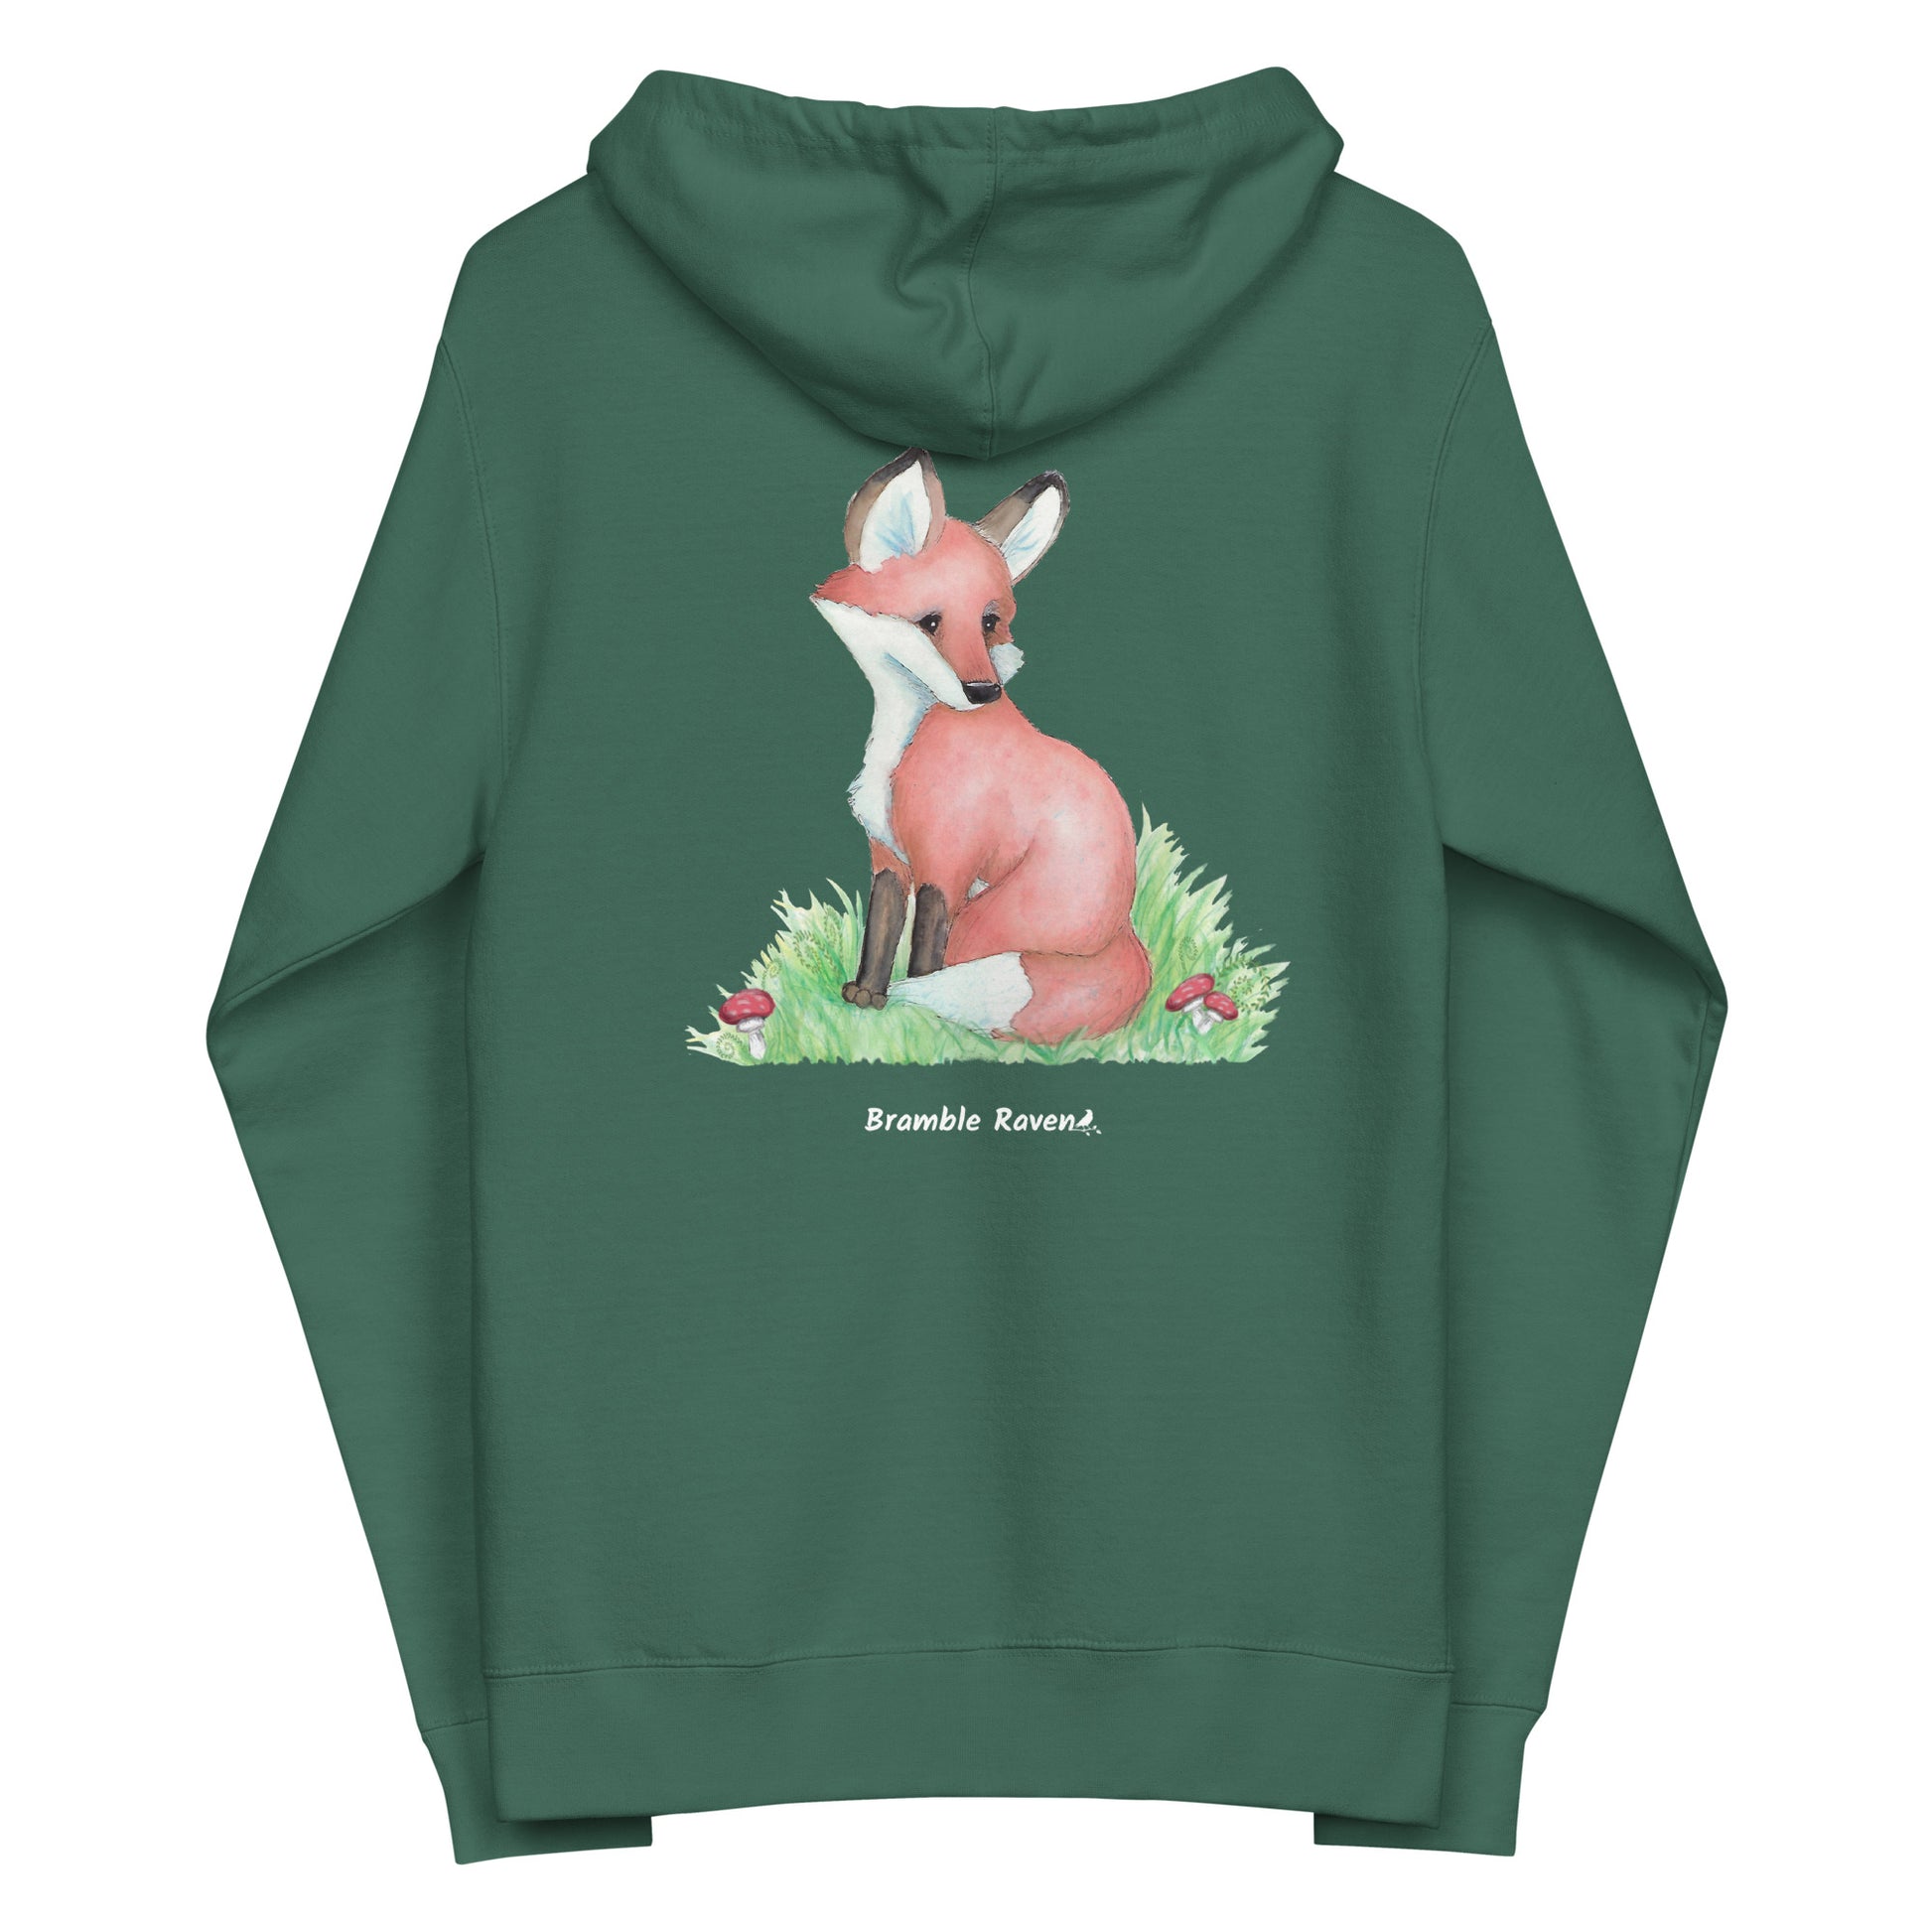 Alpine green colored unisex fleece zip up hoodie. Back design features a watercolor fox in the grass with ferns and mushrooms. Has a jersey-lined hood, metal eyelets and zipper.